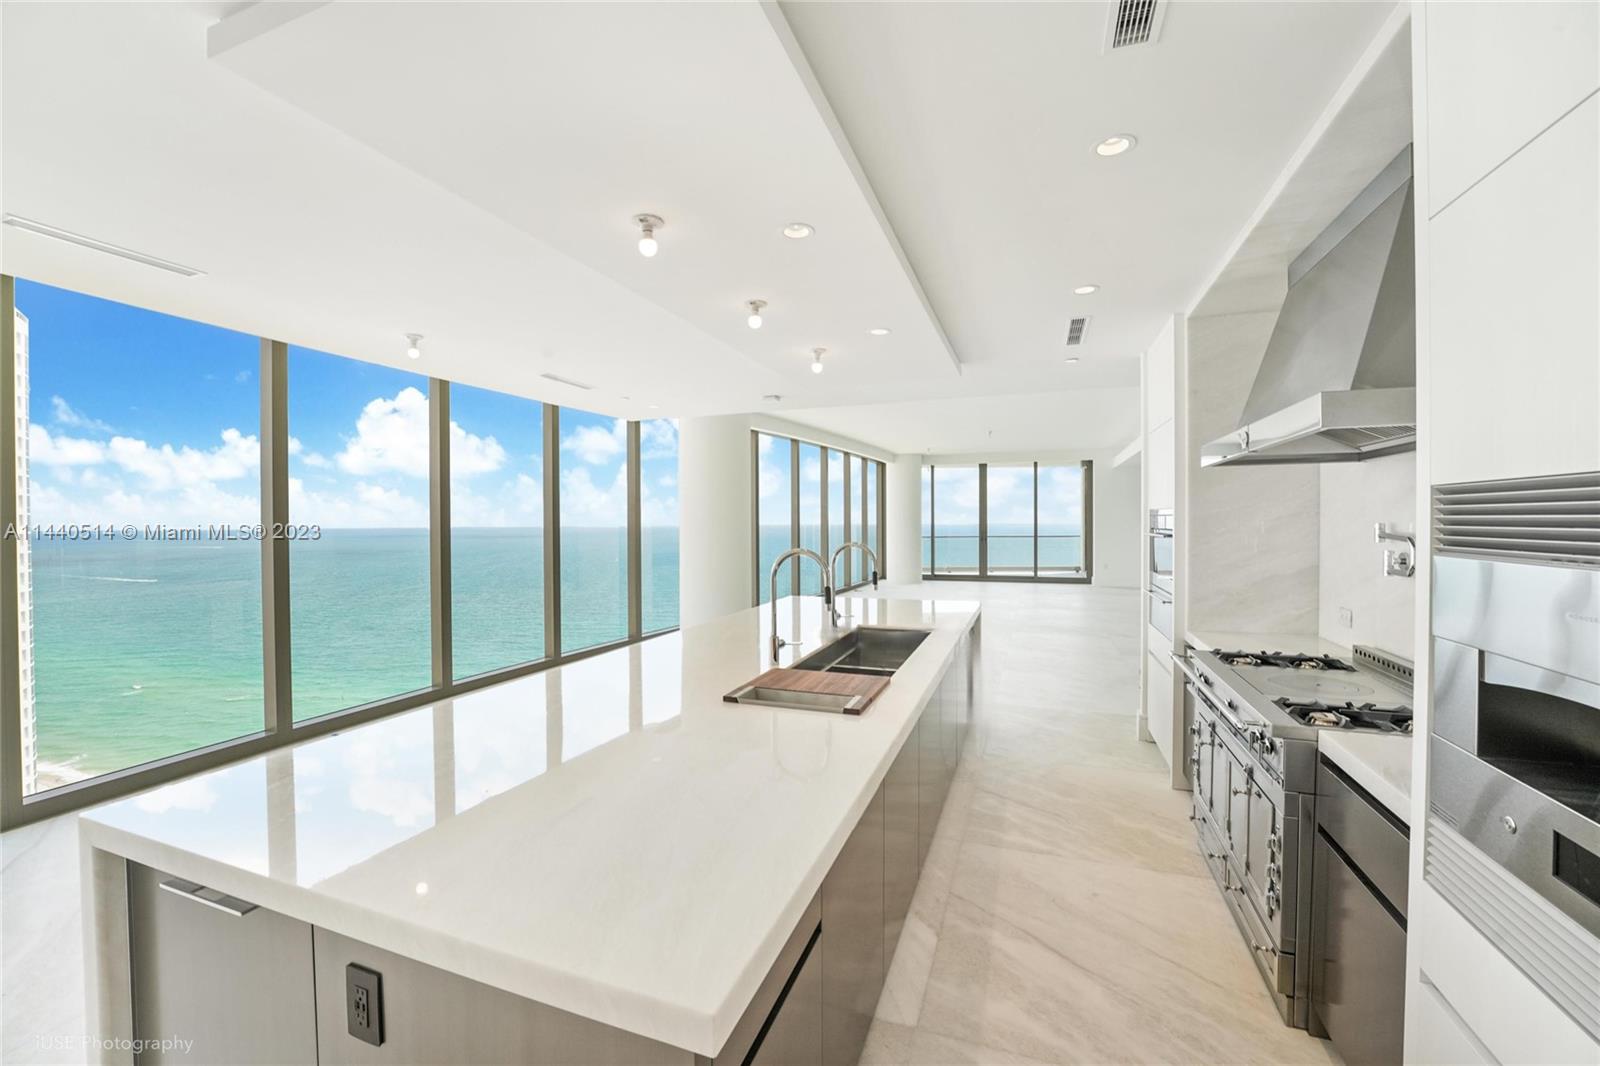 Stunning custom designed 4-bedroom, 4,5-bath residence at The New Estates at Acqualina North Tower.  This elegant home boasts a sweeping panoramic ocean and skyline views. The combination of white wash oak wood and mystery white marble floors, onyx fireplace, adding elegance and charm to every room. A state-of-the-art Creston smart home system, gourmet kitchen by Dada Engineered with La Cornue gas range, pizza oven and 14 foot long onyx island, summer kitchen and sauna at the terrace, making this move-in-ready unit the ideal beachfront residence. The primary suite is a true sanctuary with ocean views and midnight bar, Molteni&C leather-covered walk-in closet and a luxurious spa-like marble bathroom.  Every detail has been carefully curated to meet the highest standards of luxury living.